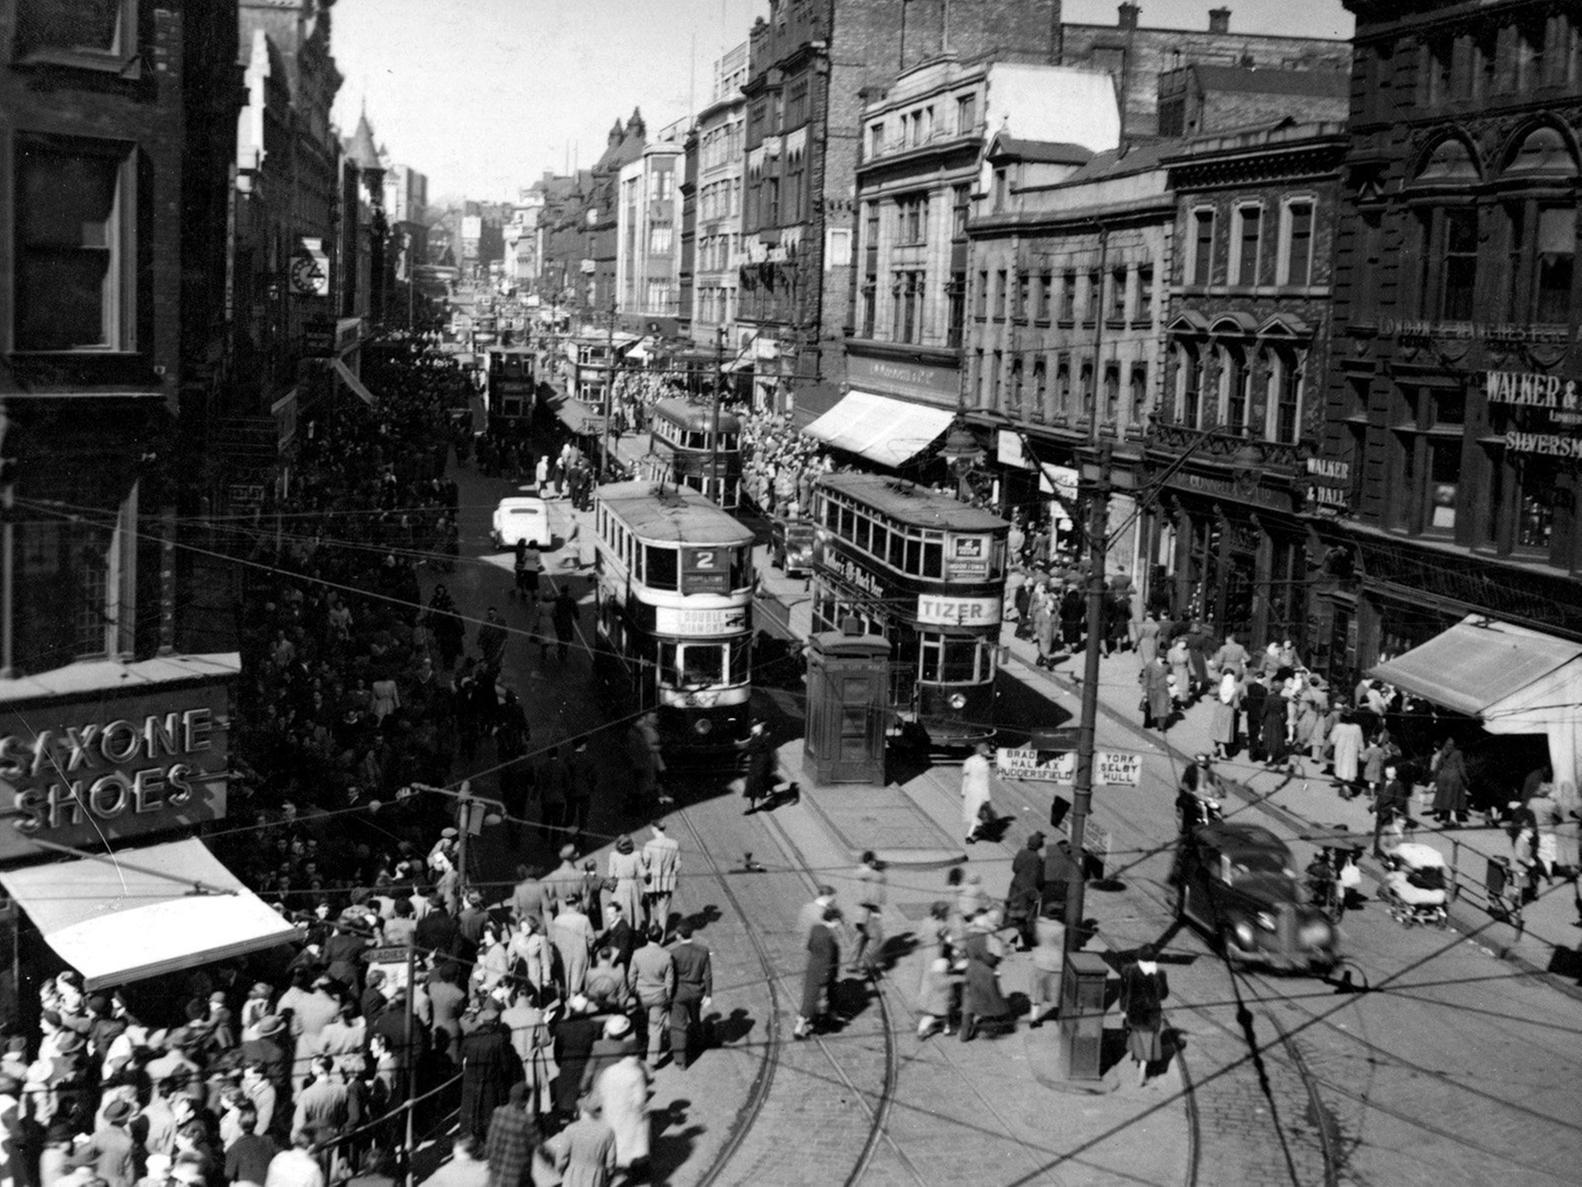 Briggate looking north from Boar Lane. At the bottom left can be seen Saxone Shoes and a parade of shops. On the right is Walker & Hall, silversmiths. There are several trams travelling along Briggate, which is full of pedestrians